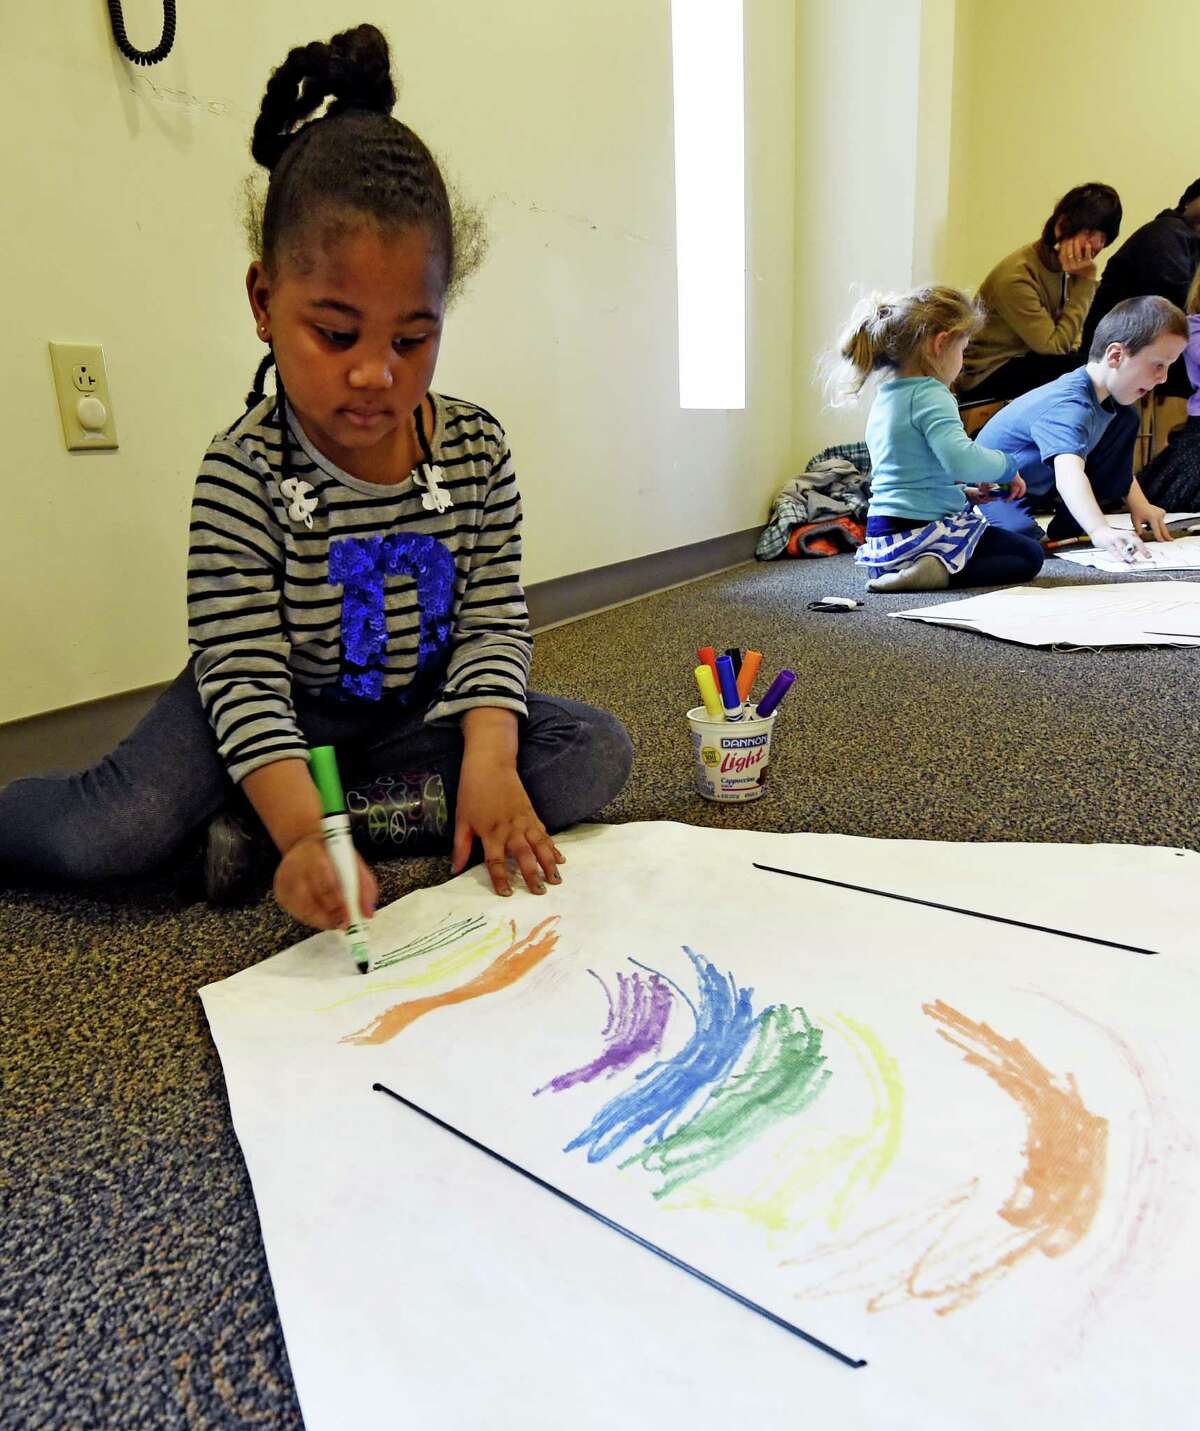 Sabriyya Chandler, 5, puts some personal artwork on her kite Wednesday, April 8, 2015, during kite making class at the Bach branch of the Albany Public Library in Albany, N.Y. (Skip Dickstein/Times Union) ORG XMIT: MER2015040815281486